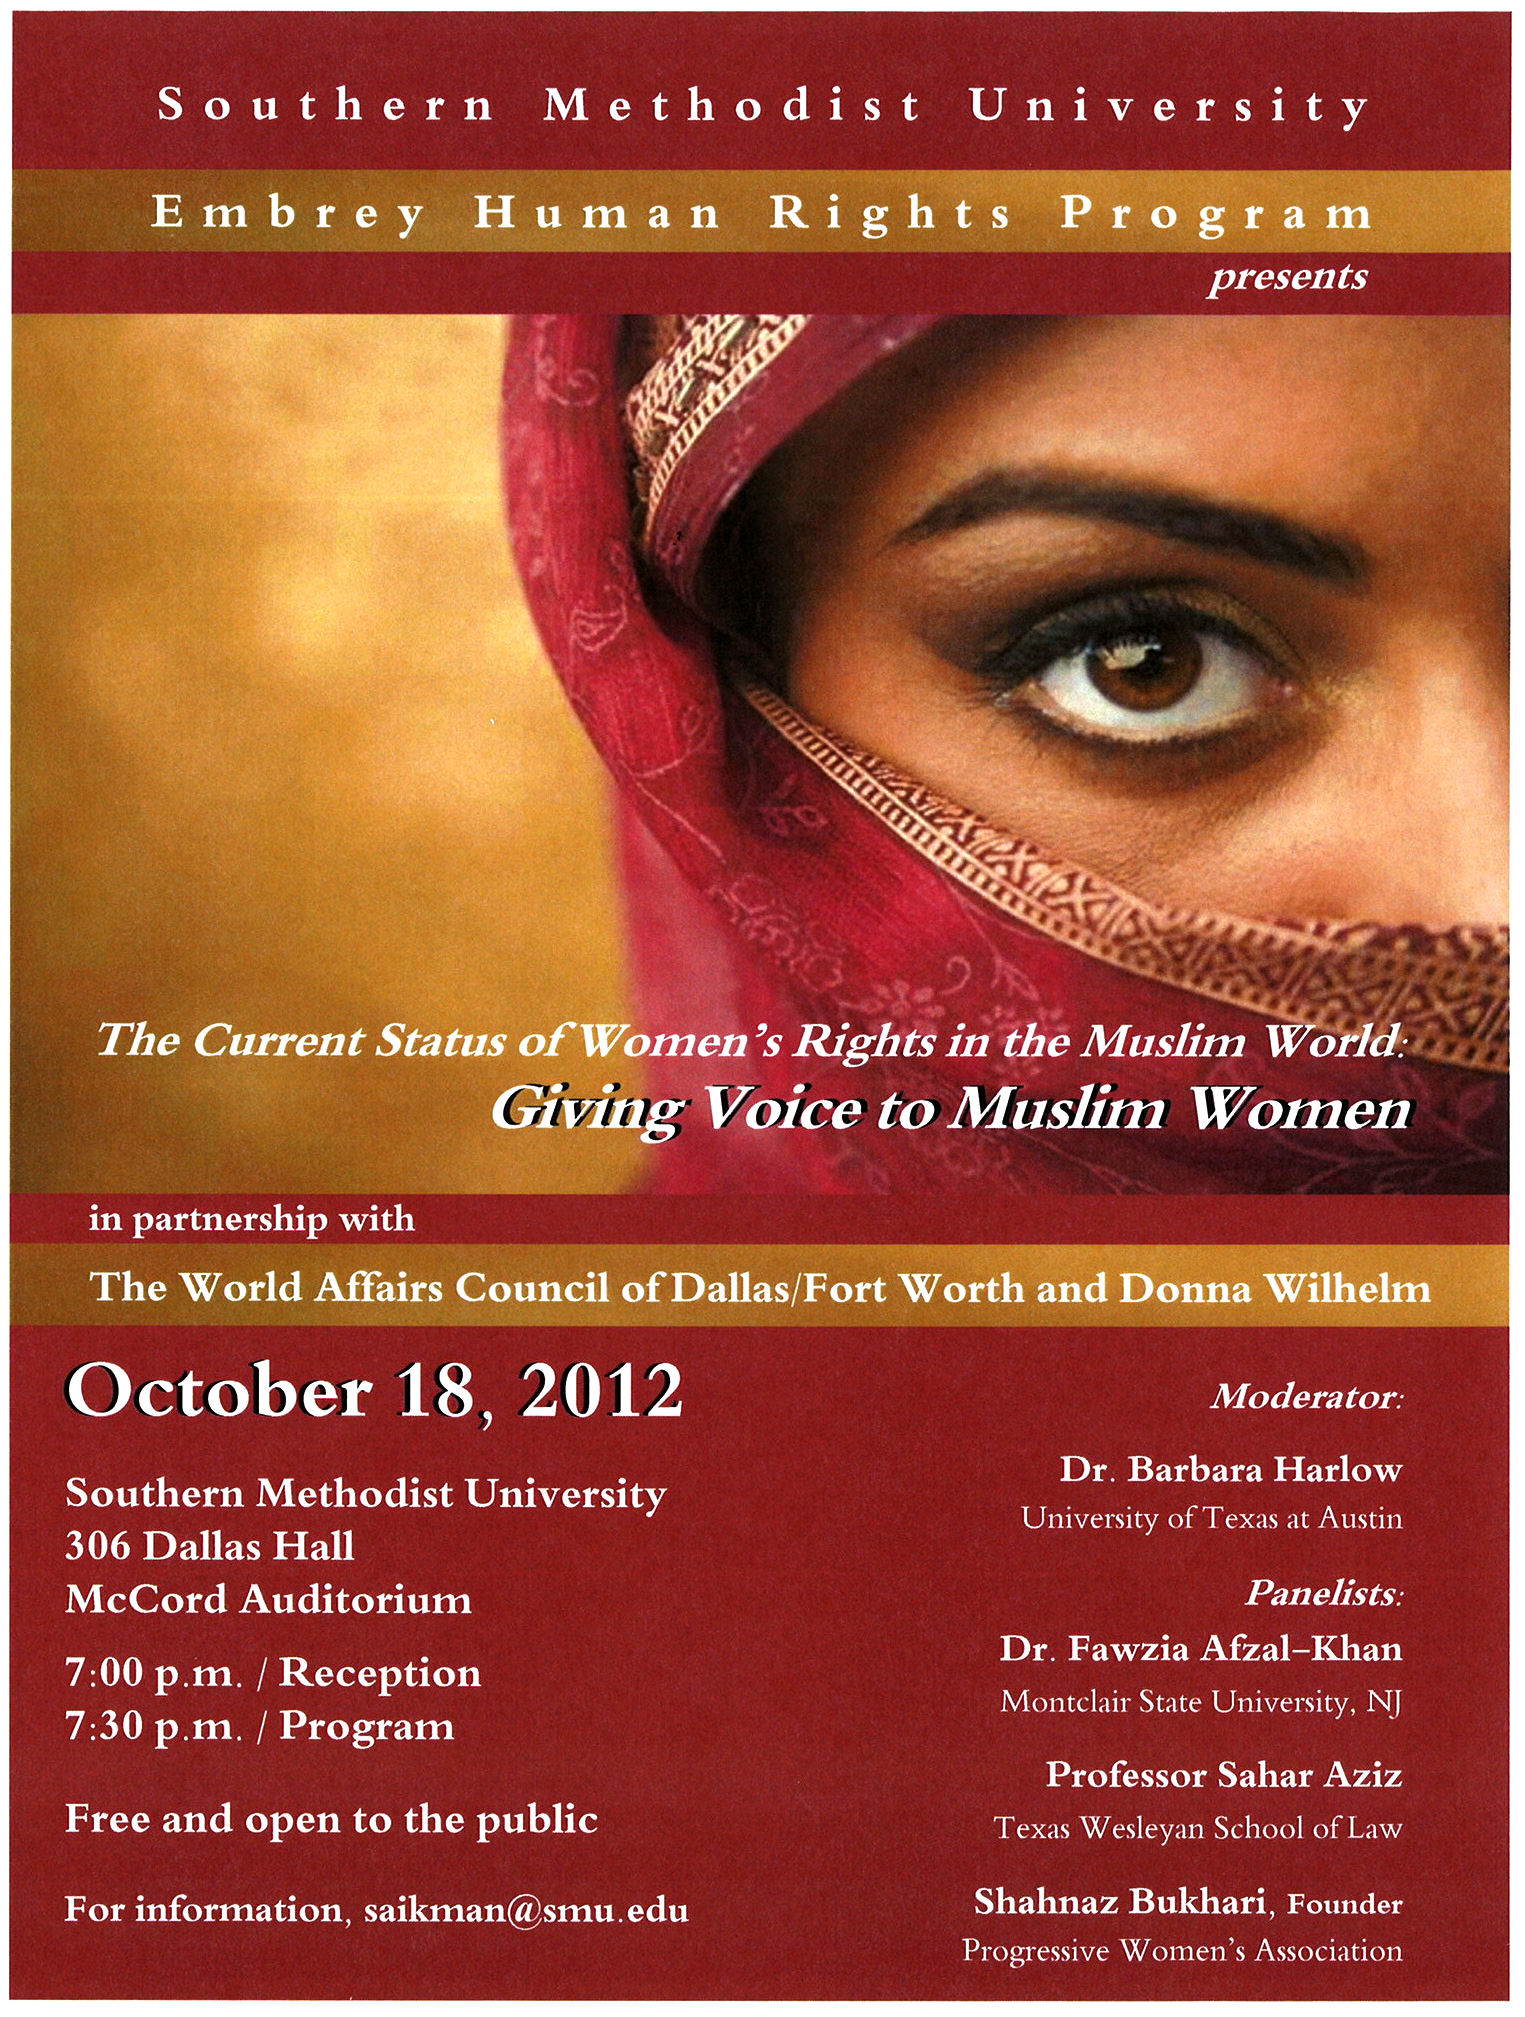 Women's Rights in a Muslim World